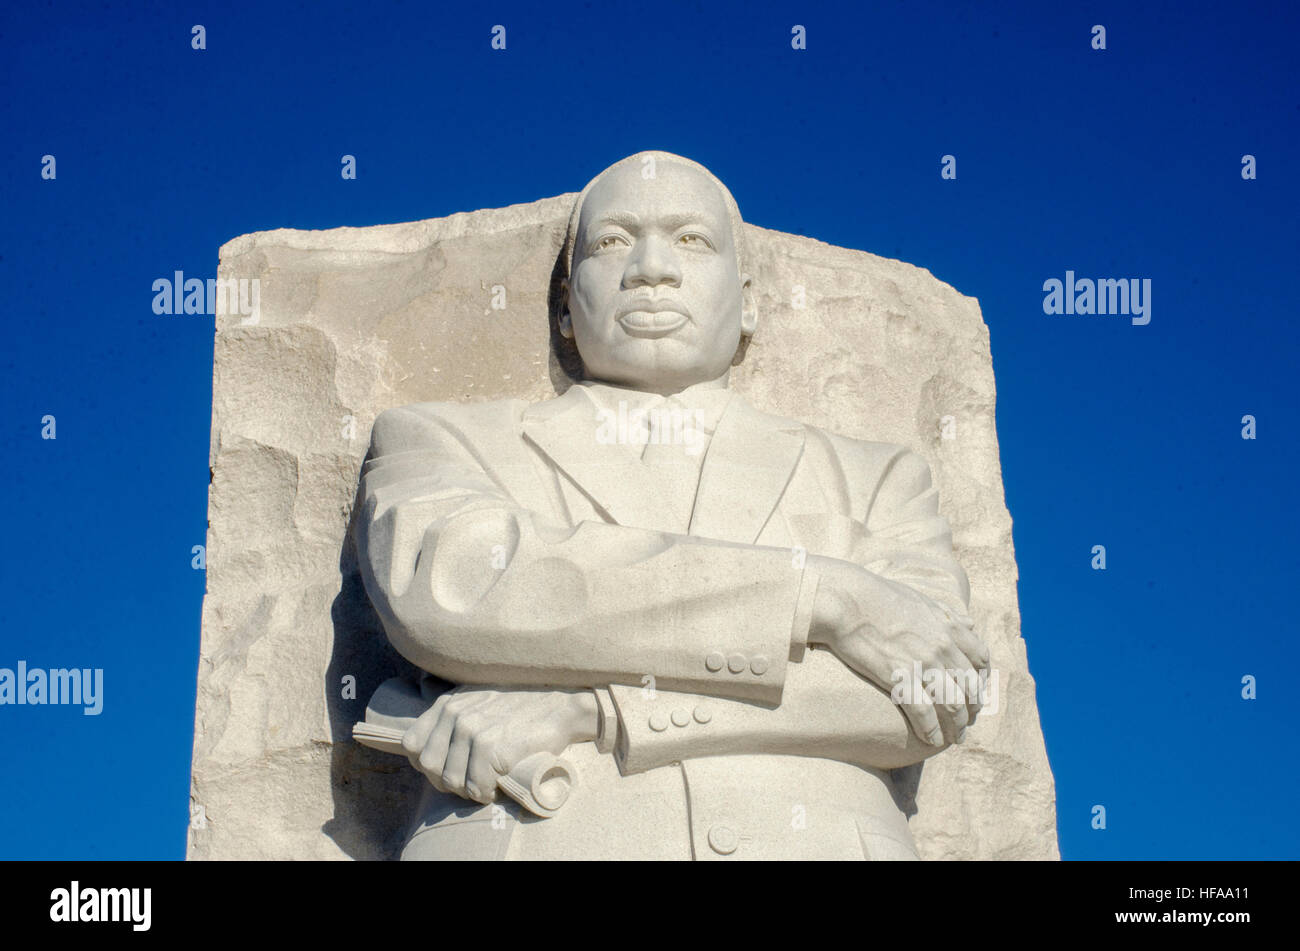 Medium close up view of the Martin Luther King, Jr., Memorial in Washington DC. Stock Photo